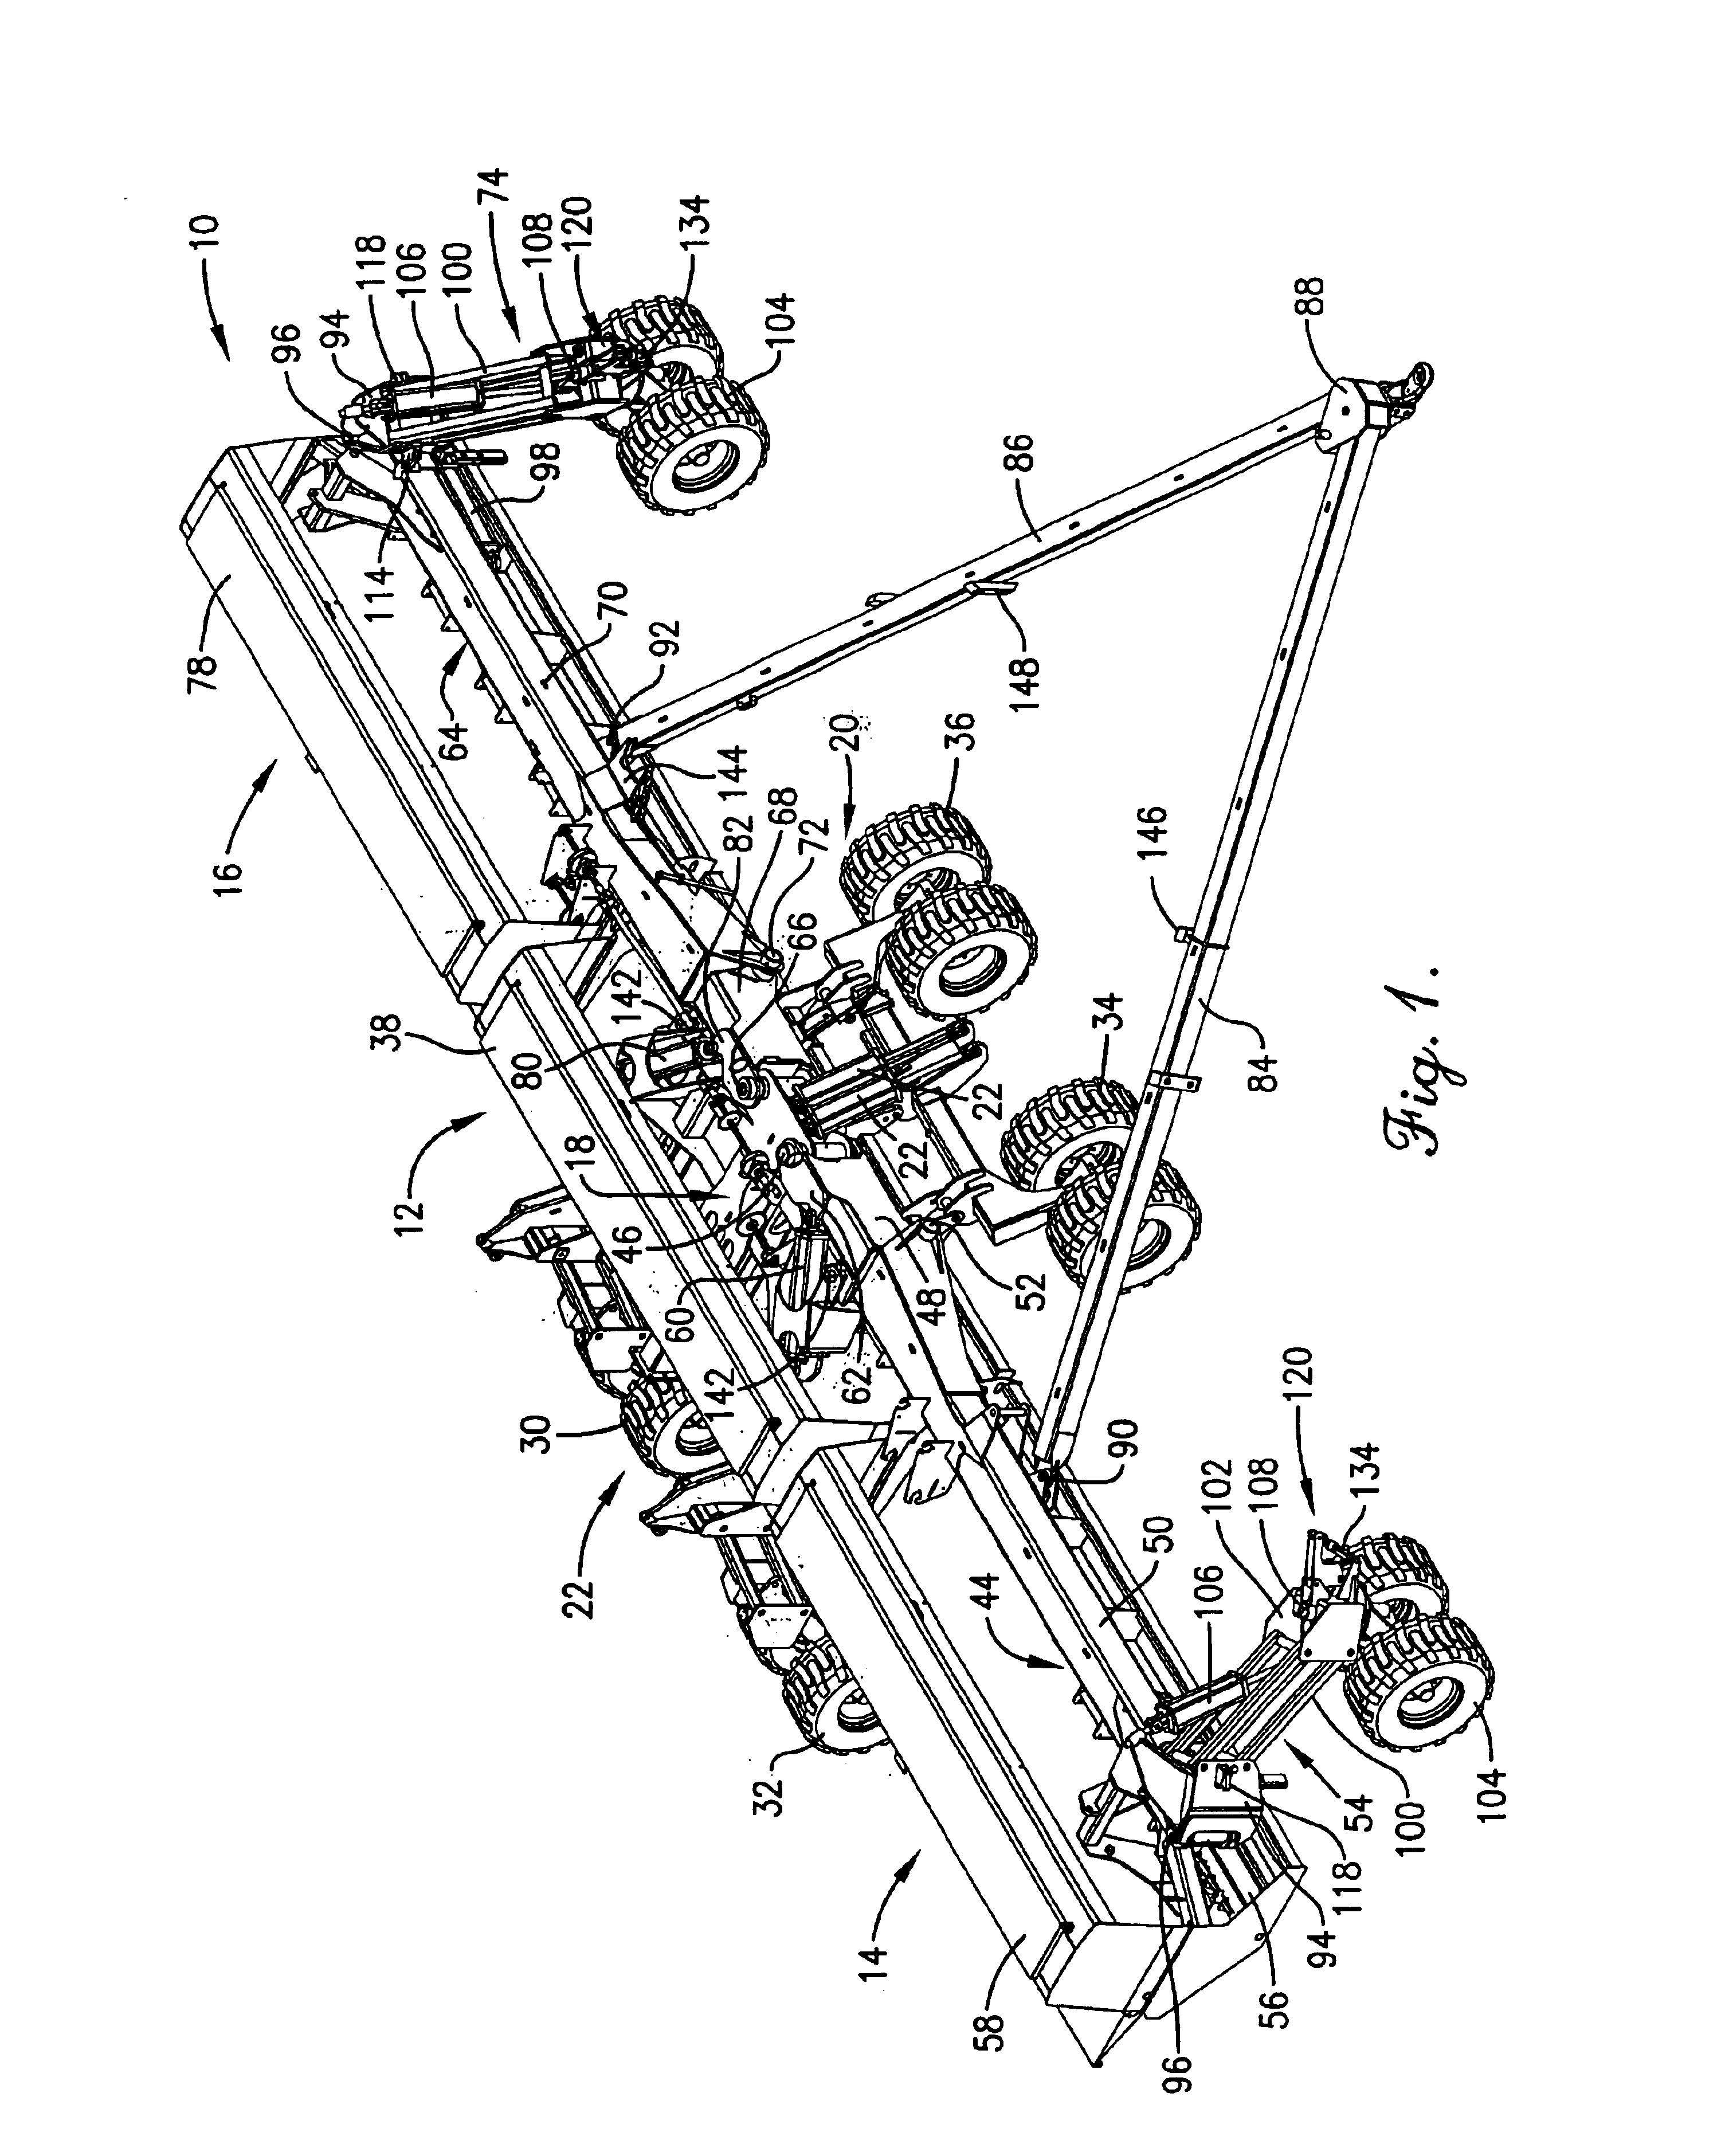 Front folding agricultural implement